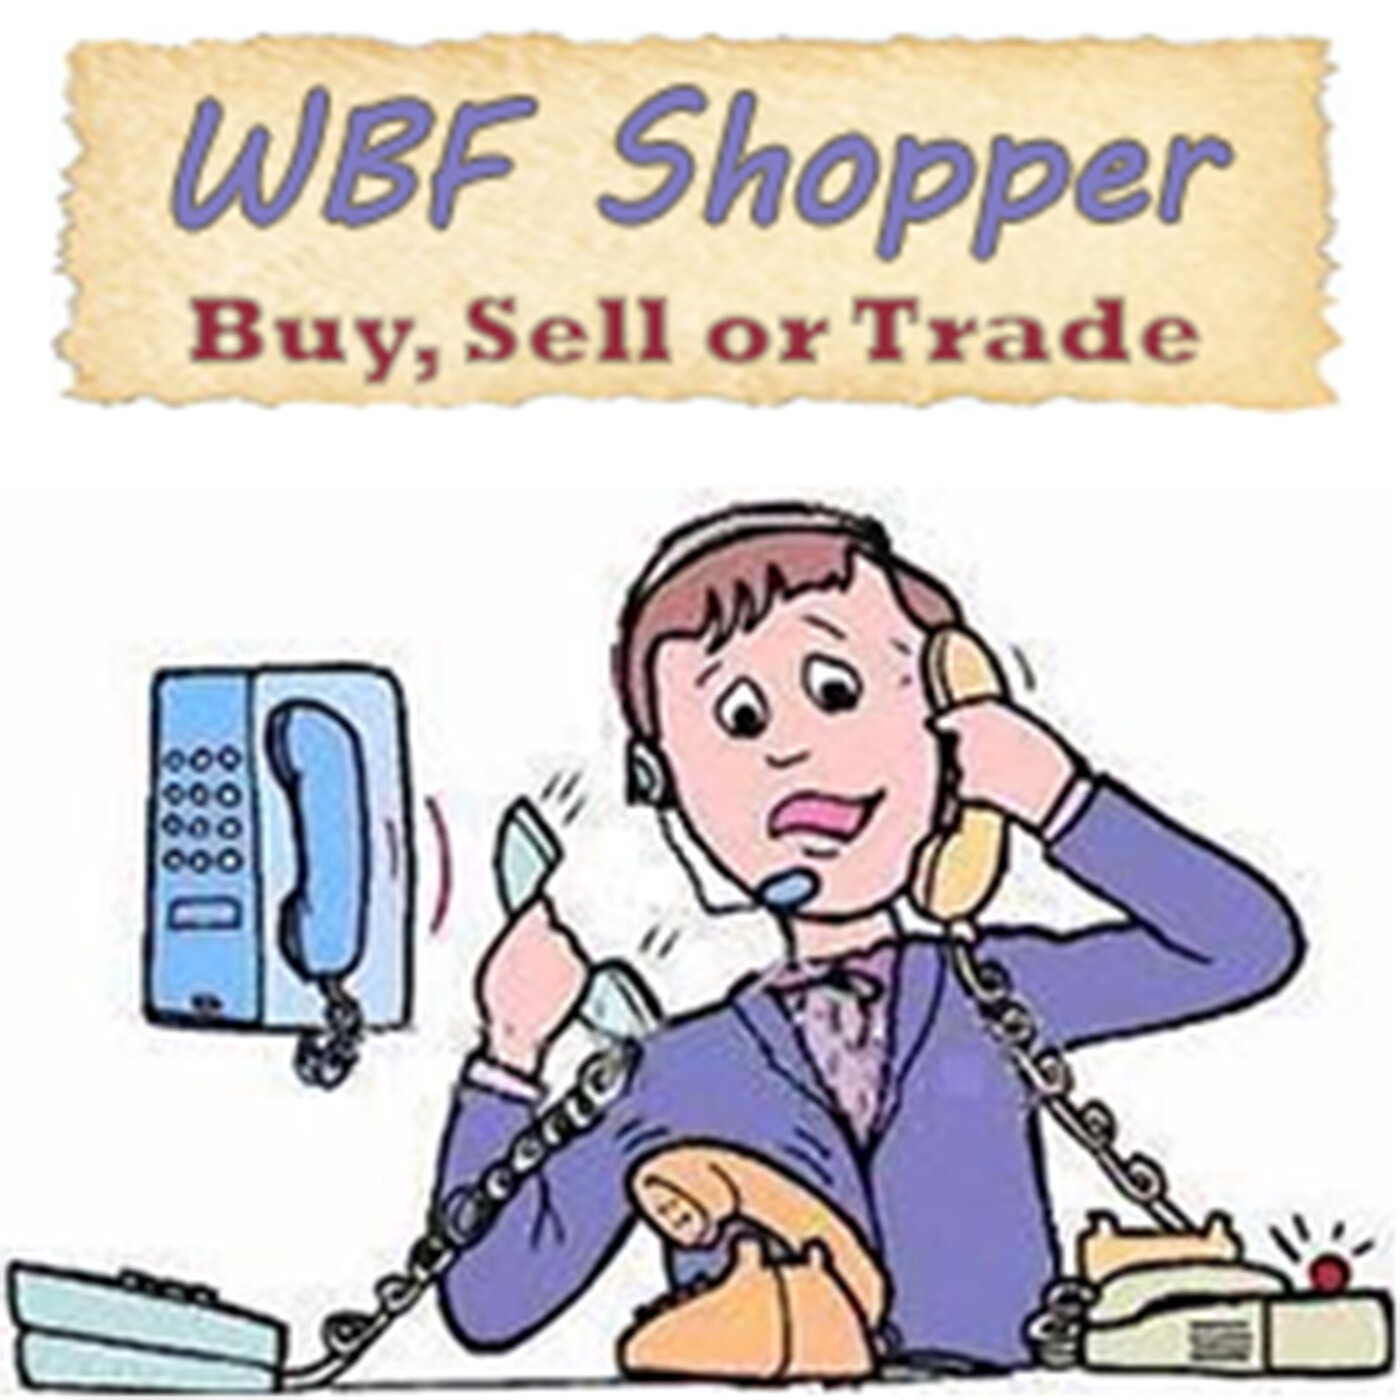 The WBF Shopper: Tuesday May 9th.